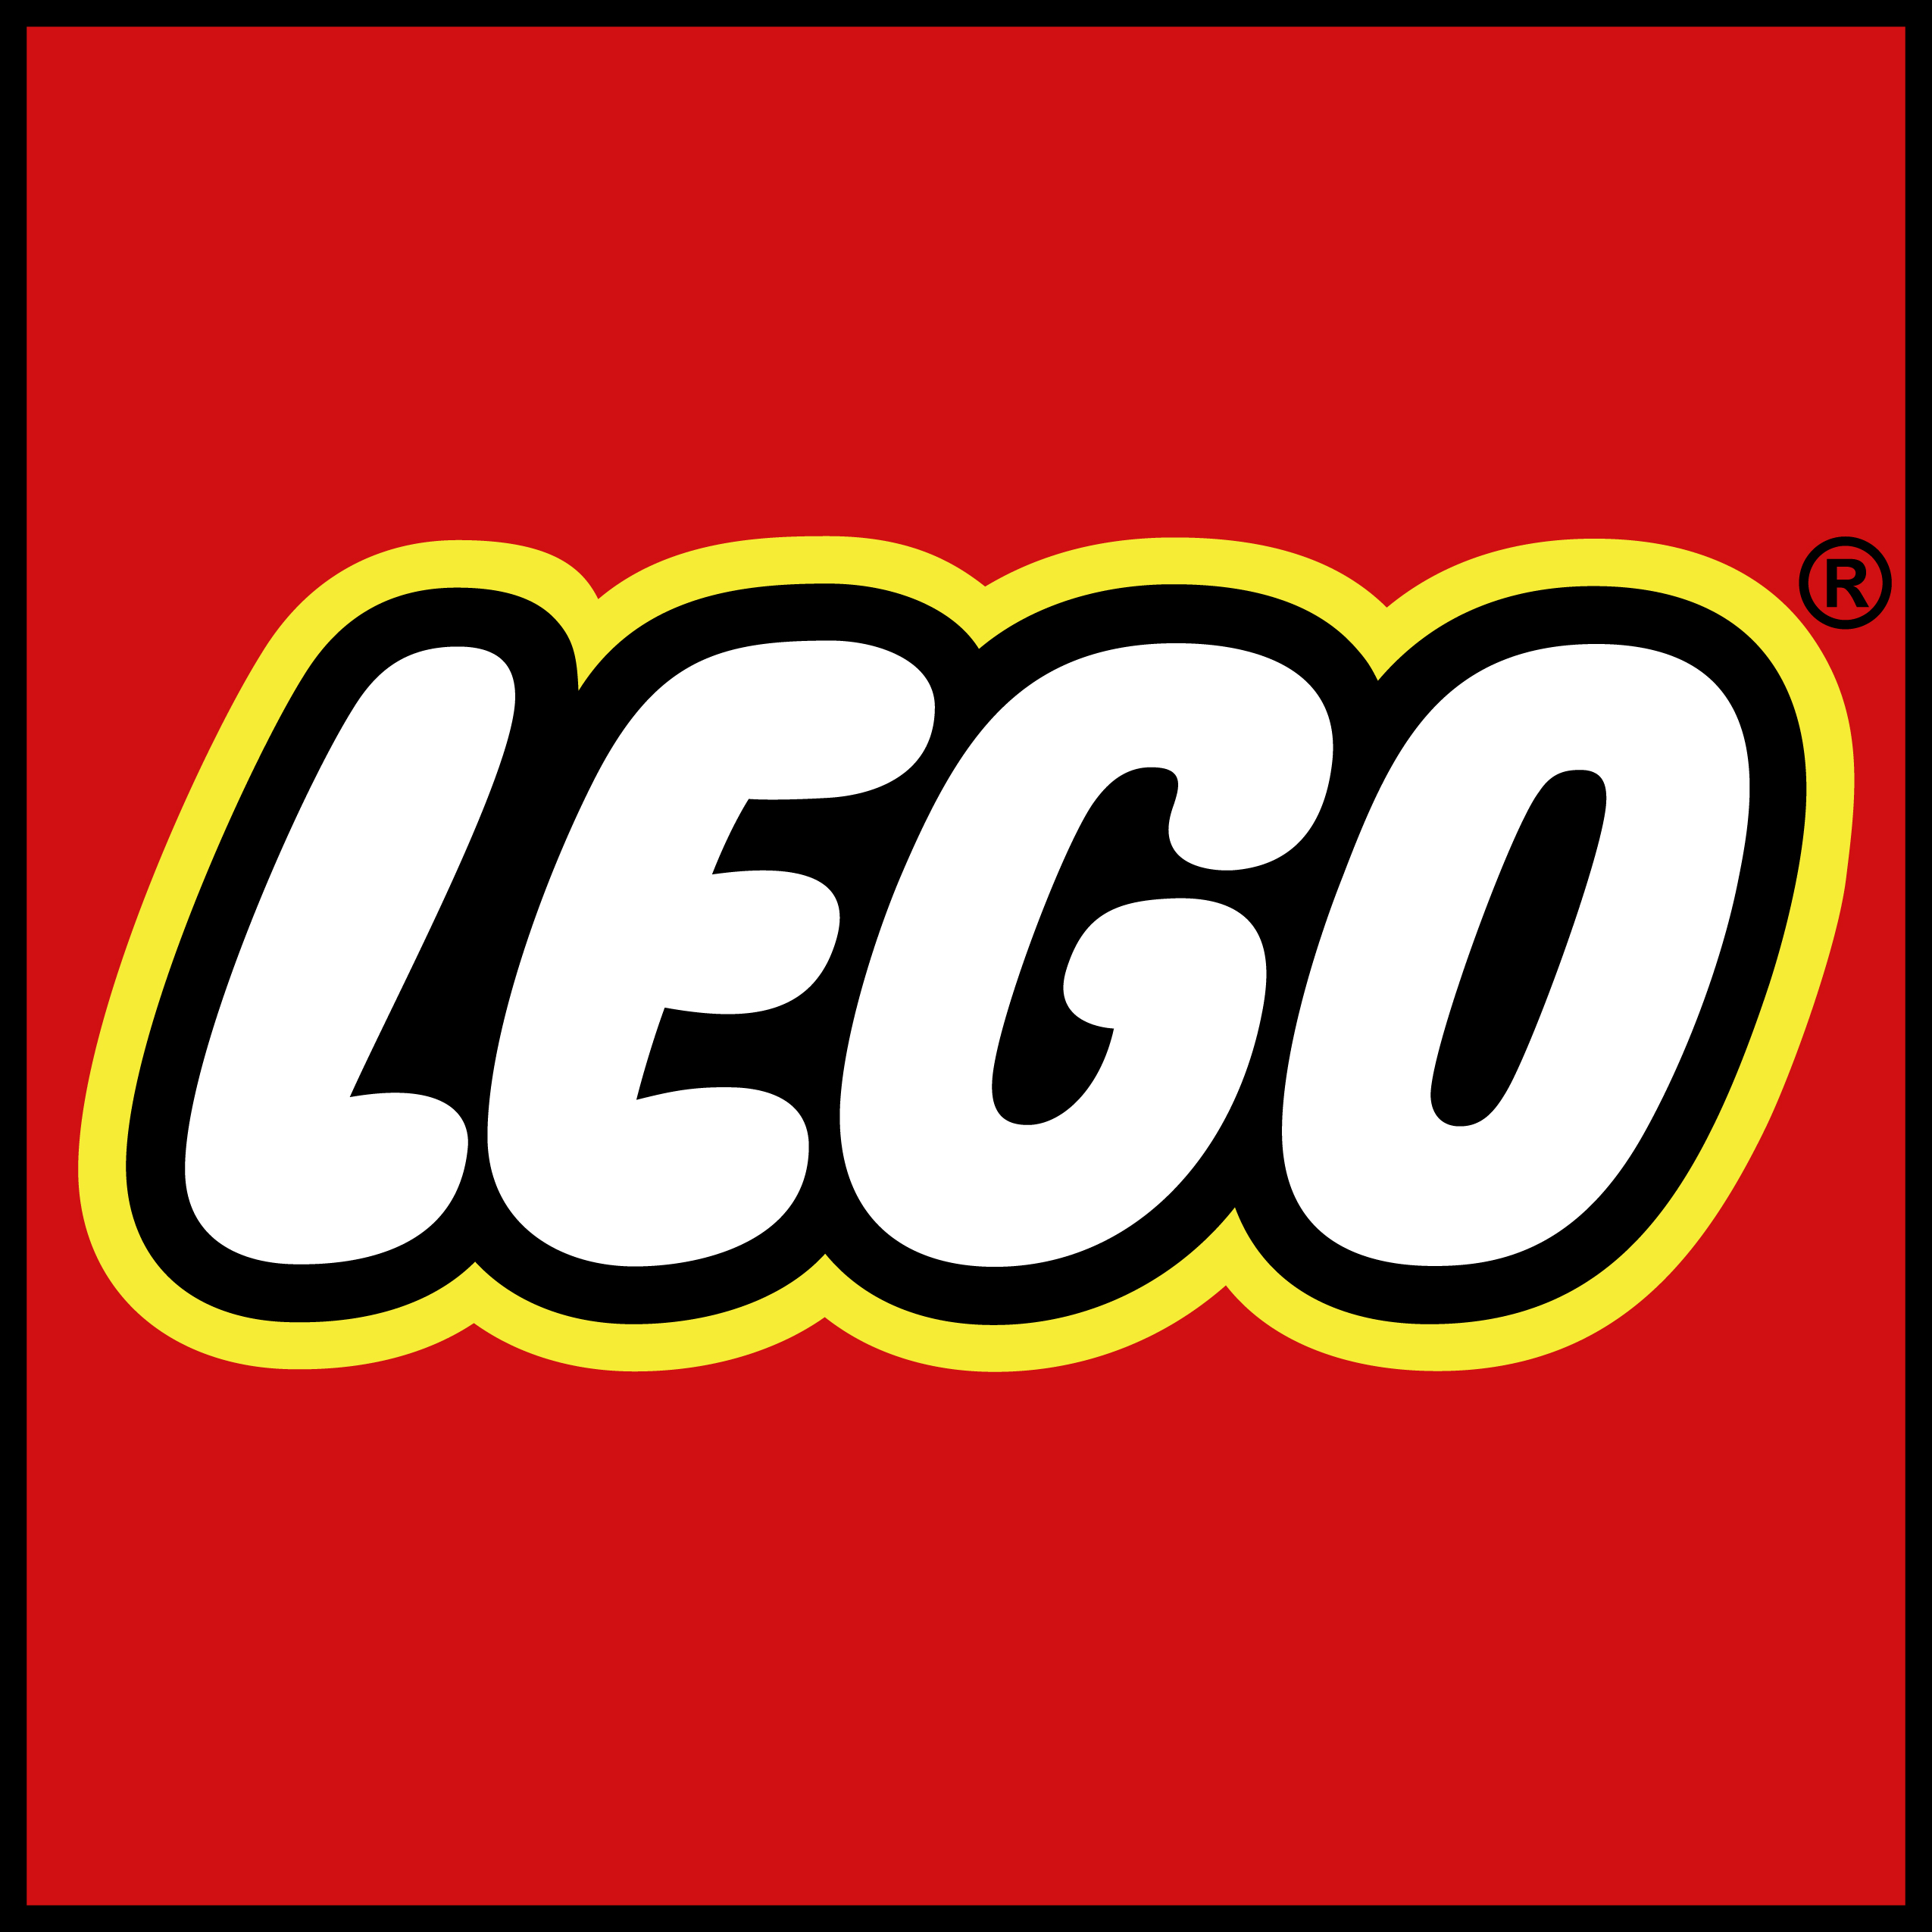 Construction of Lego store